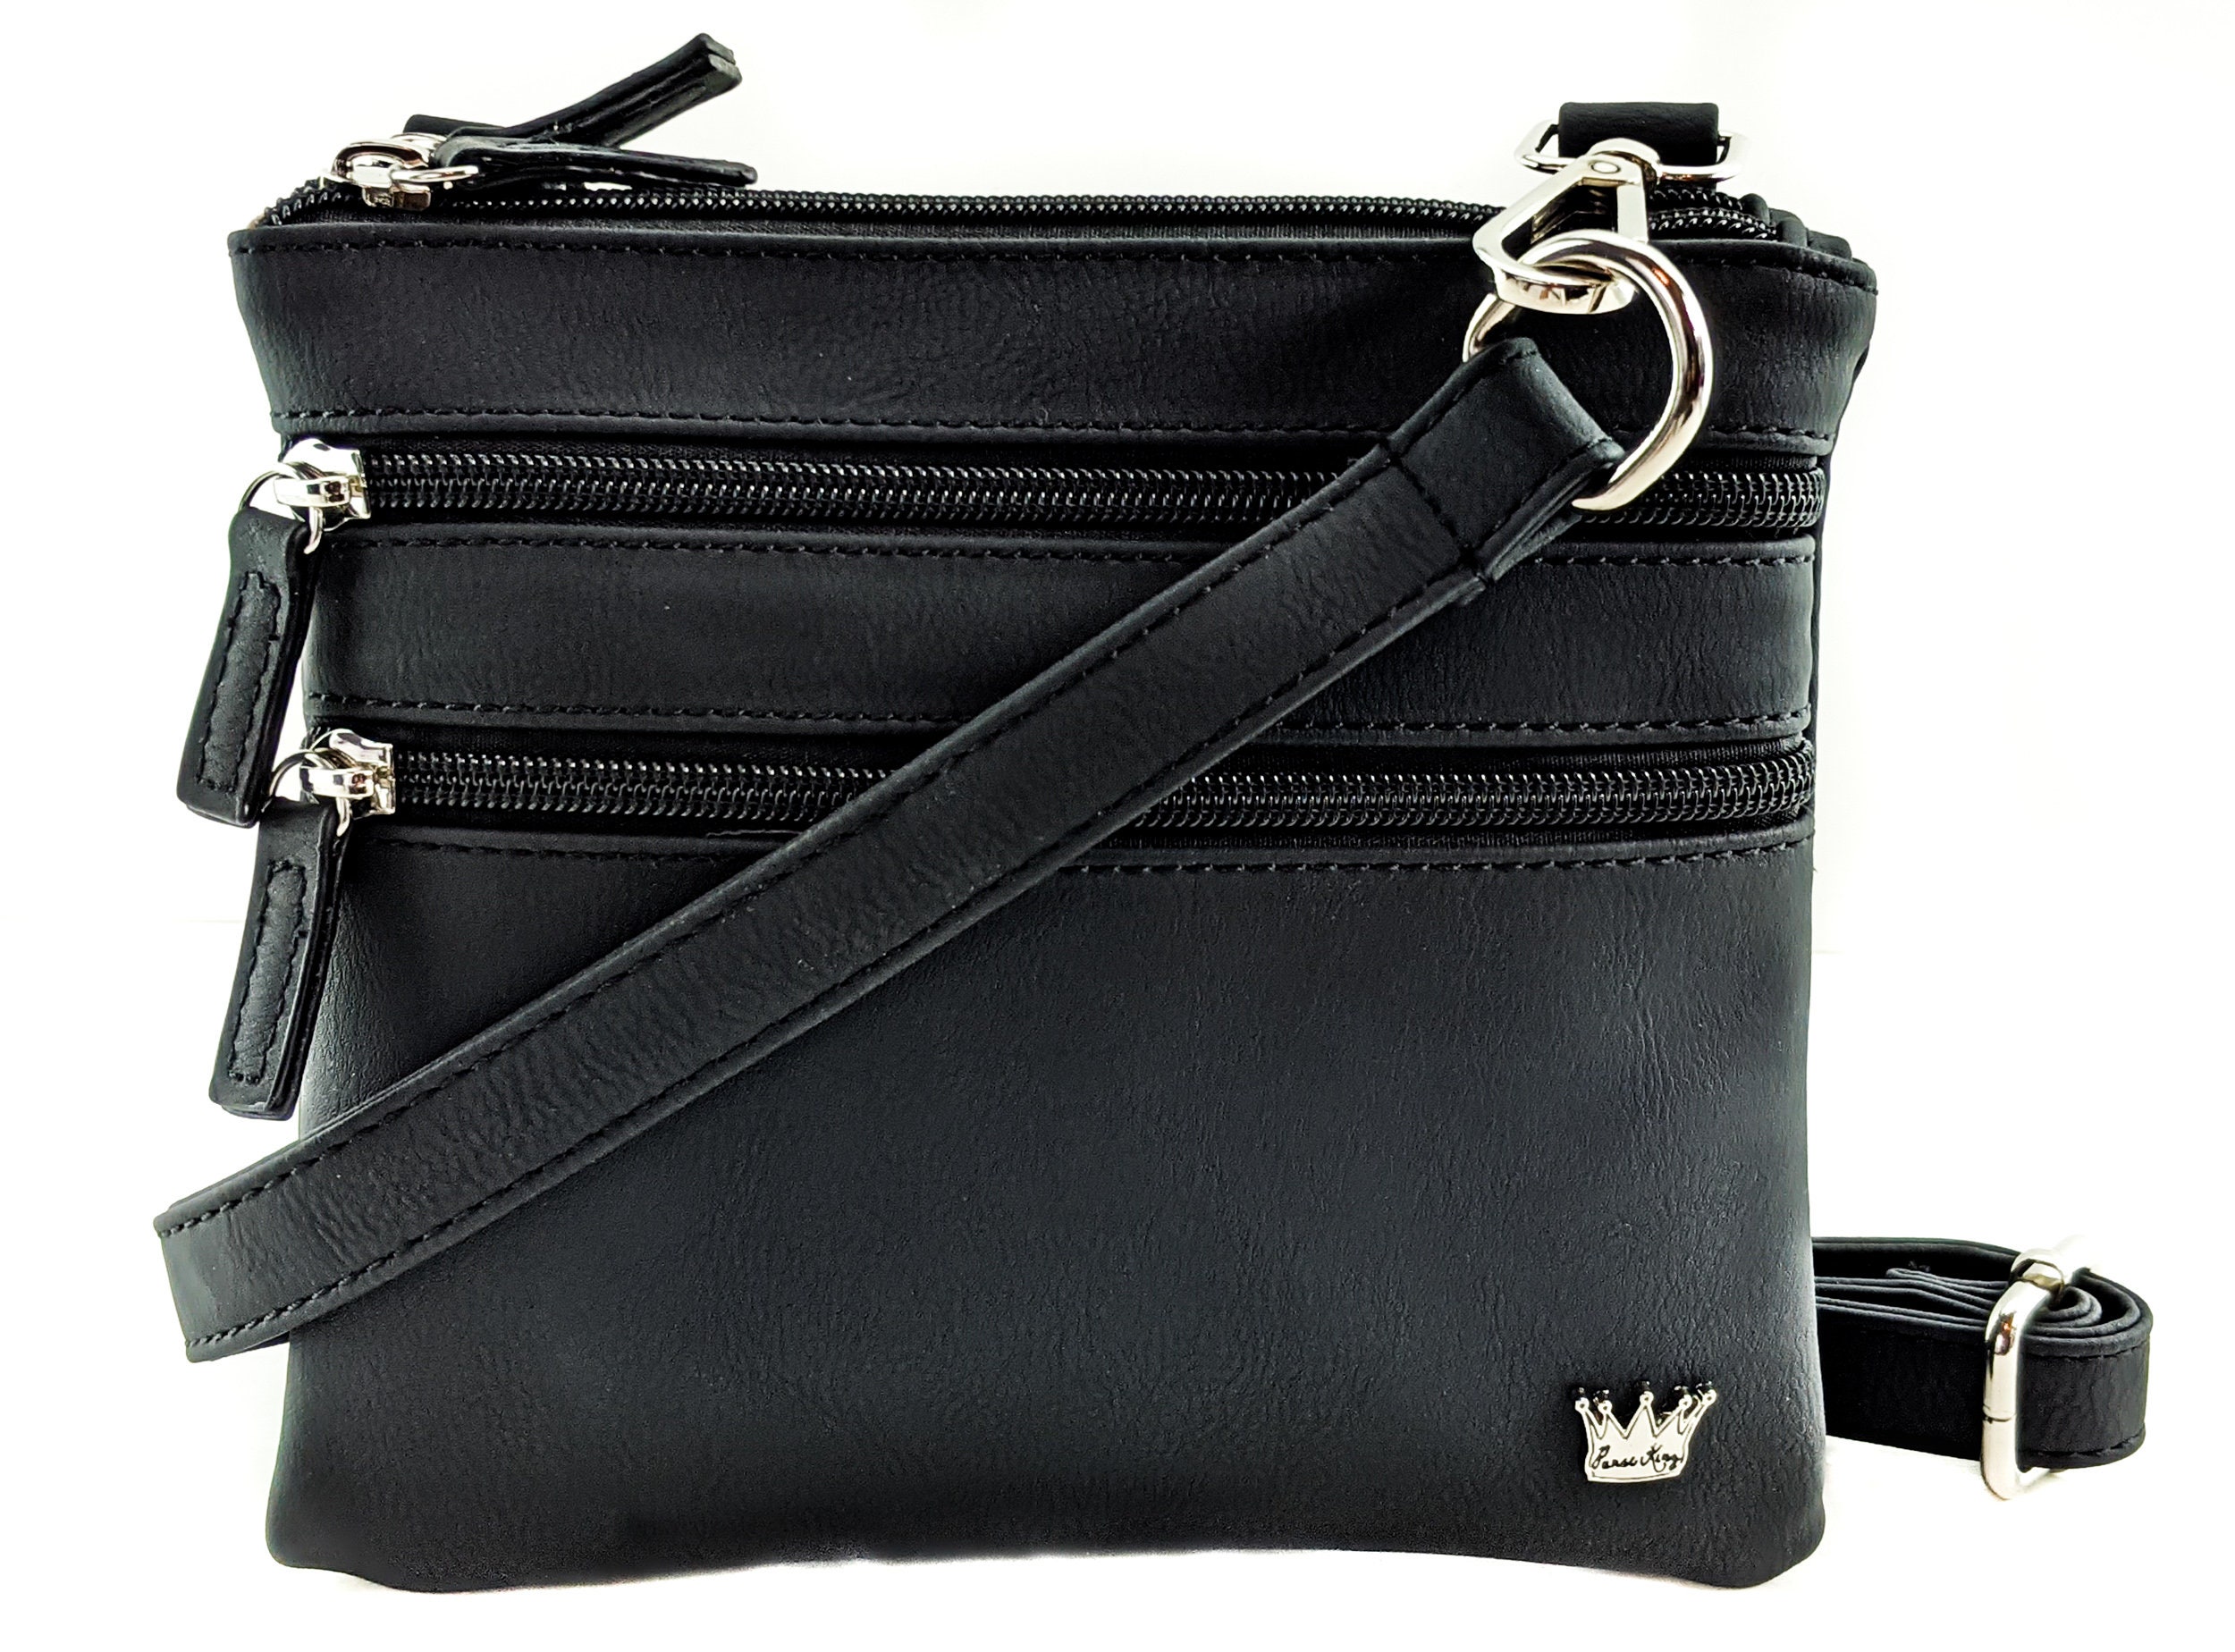 VISONE Leather Cross-body Bag in Black Womens Bags Crossbody bags and purses 